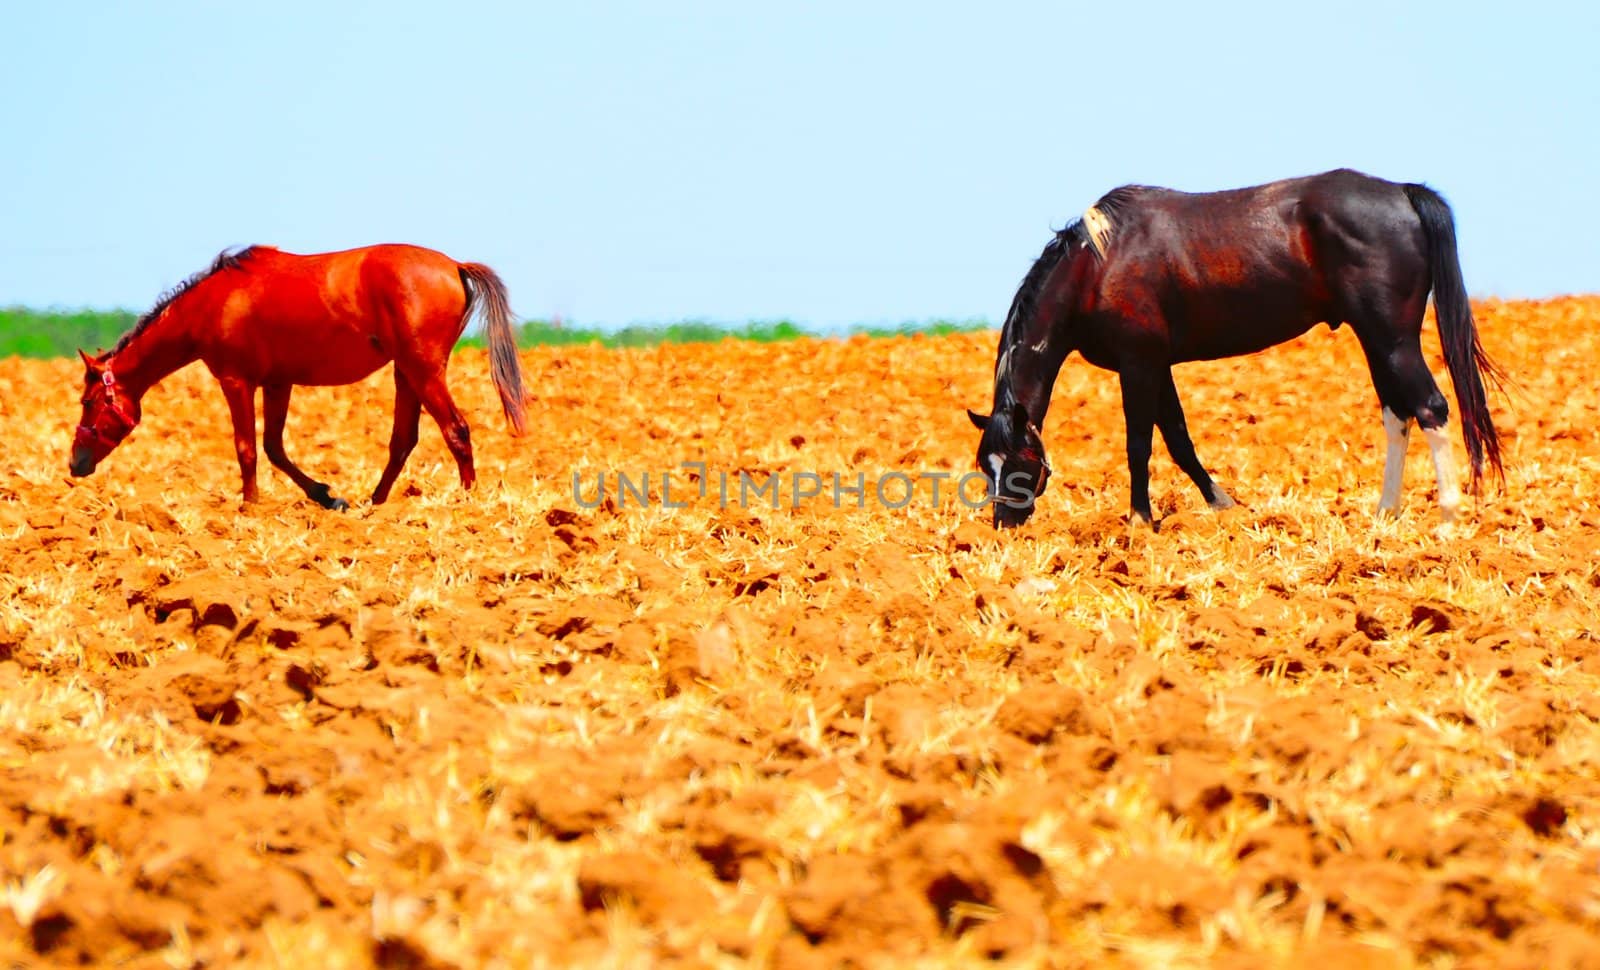 Two  Horses  Walking  On Freshly Plowed Field Ready For Cultivation.